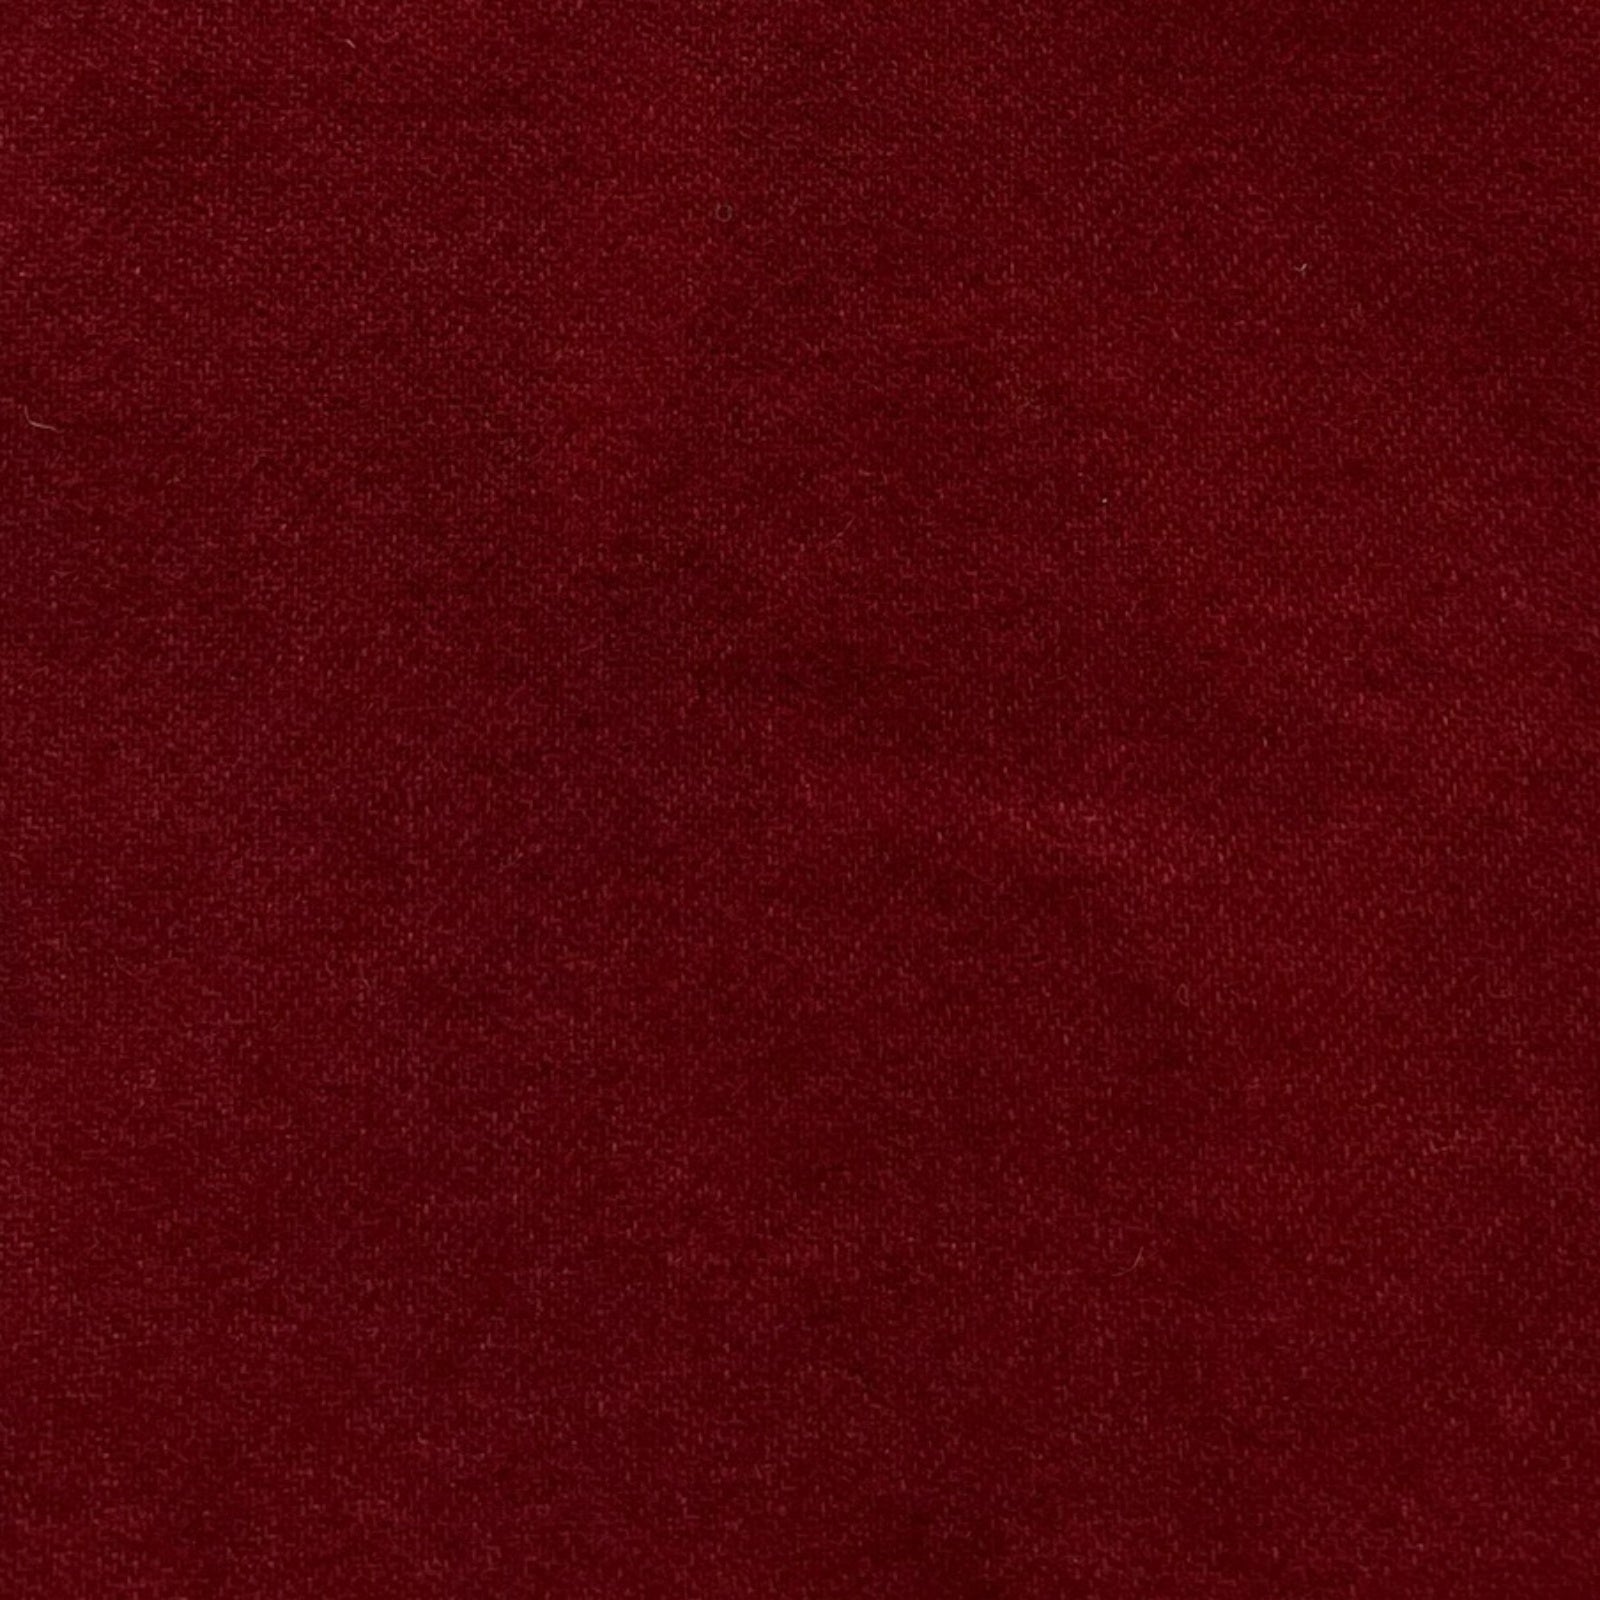 Holly Hill Red Medium - Colorama Hand Dyed Wool - Offered by HoneyBee Hive Rug Hooking